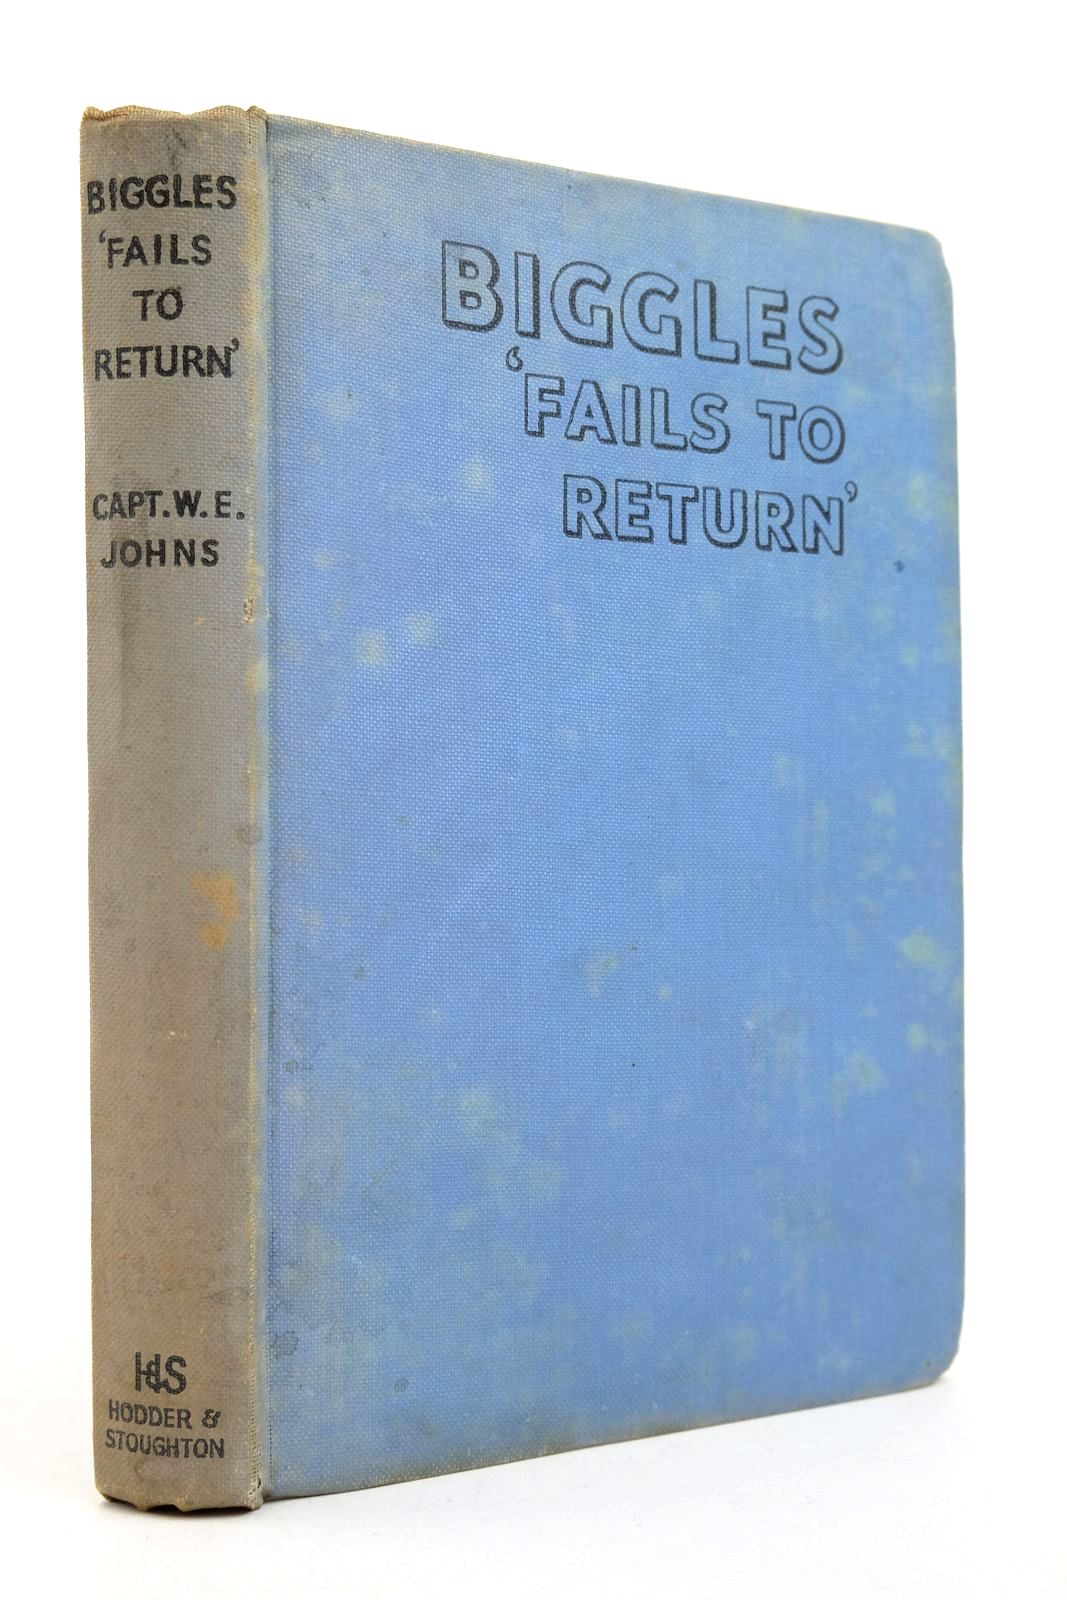 Photo of BIGGLES FAILS TO RETURN written by Johns, W.E. illustrated by Stead,  published by Hodder &amp; Stoughton (STOCK CODE: 2139774)  for sale by Stella & Rose's Books